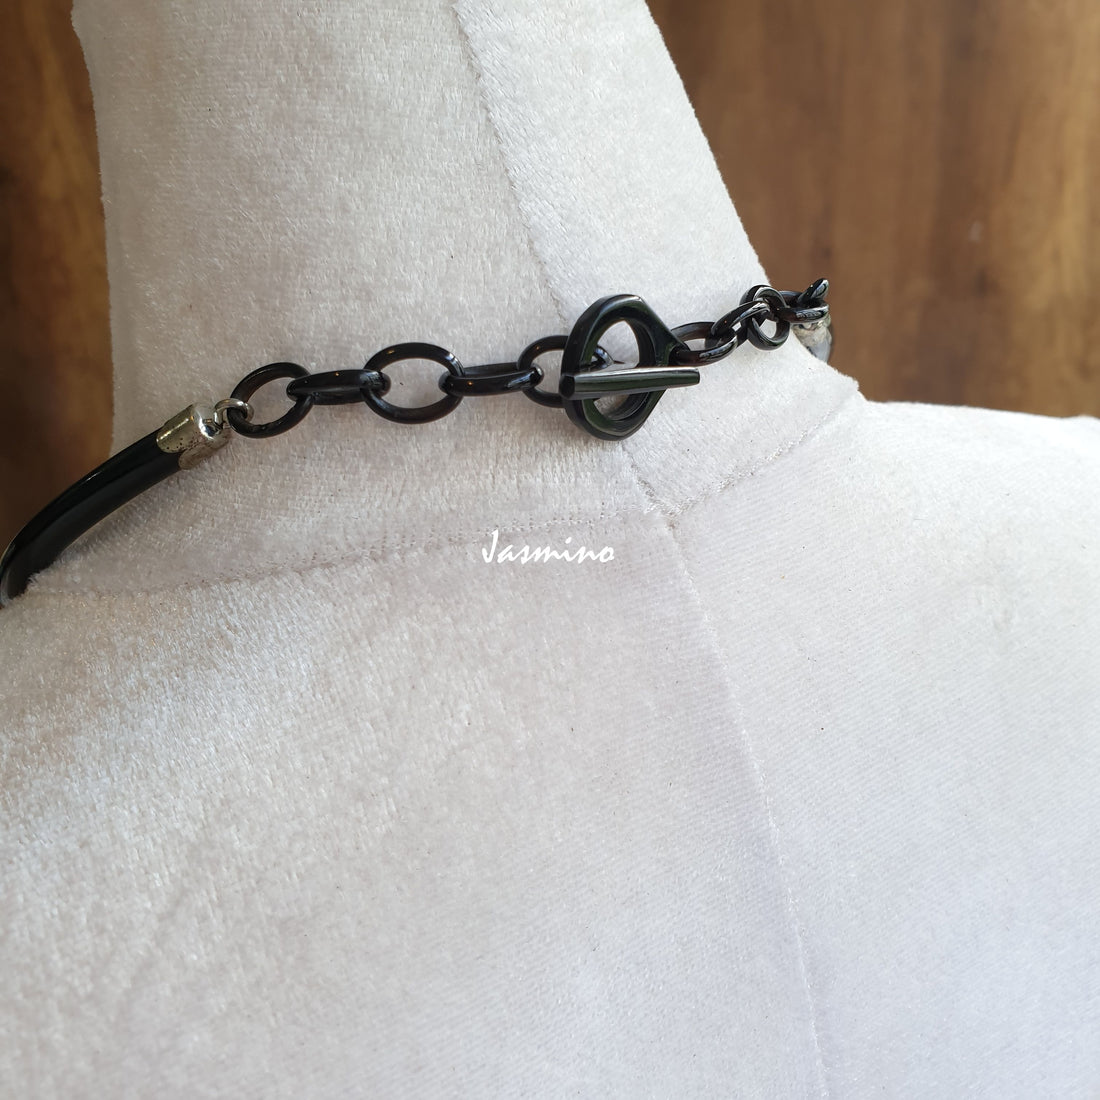 Jasmino unique handmade Christmas snowflake necklace features black in natural buffalo horn for women on holidays